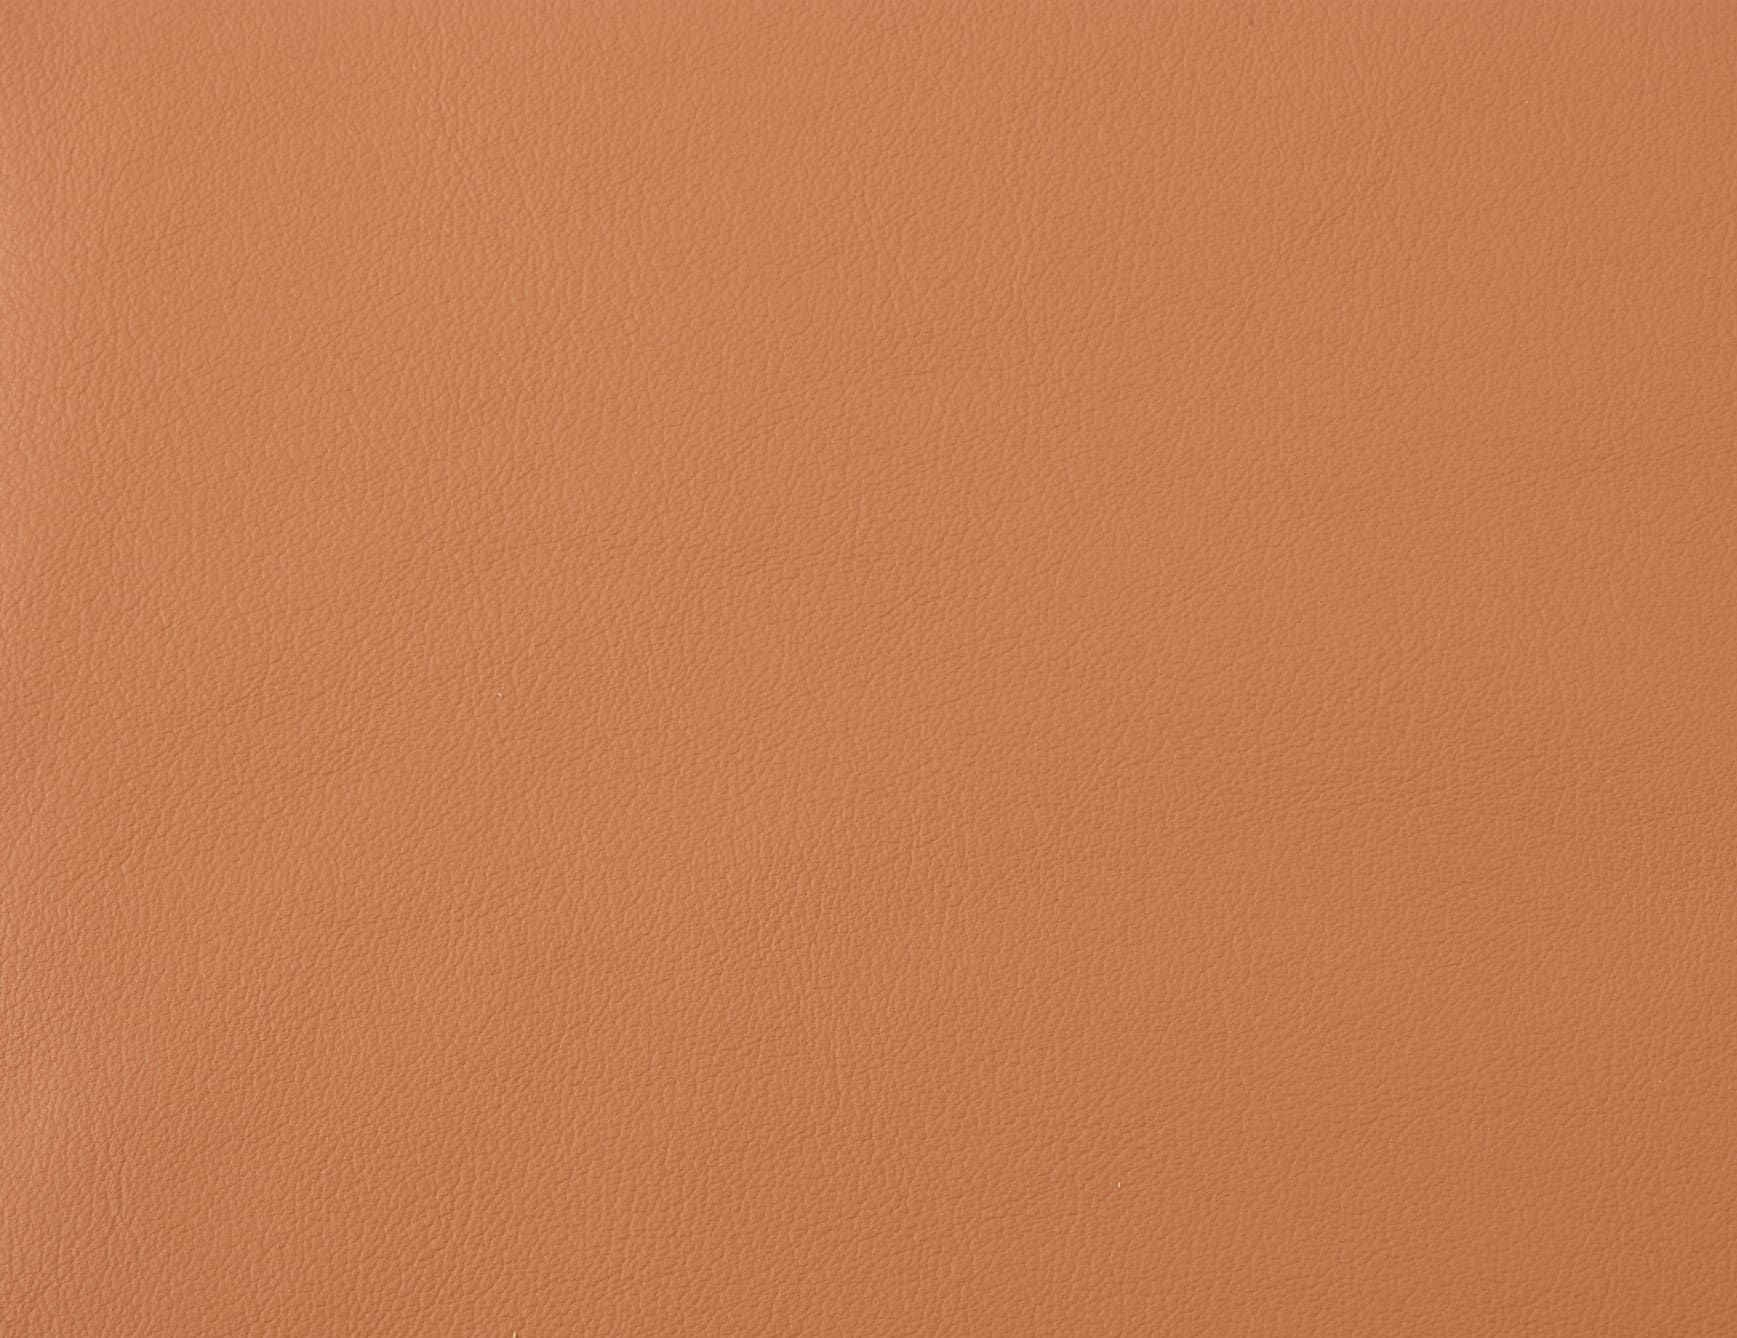 Cotto contemporary Italian upholstery leather in orange